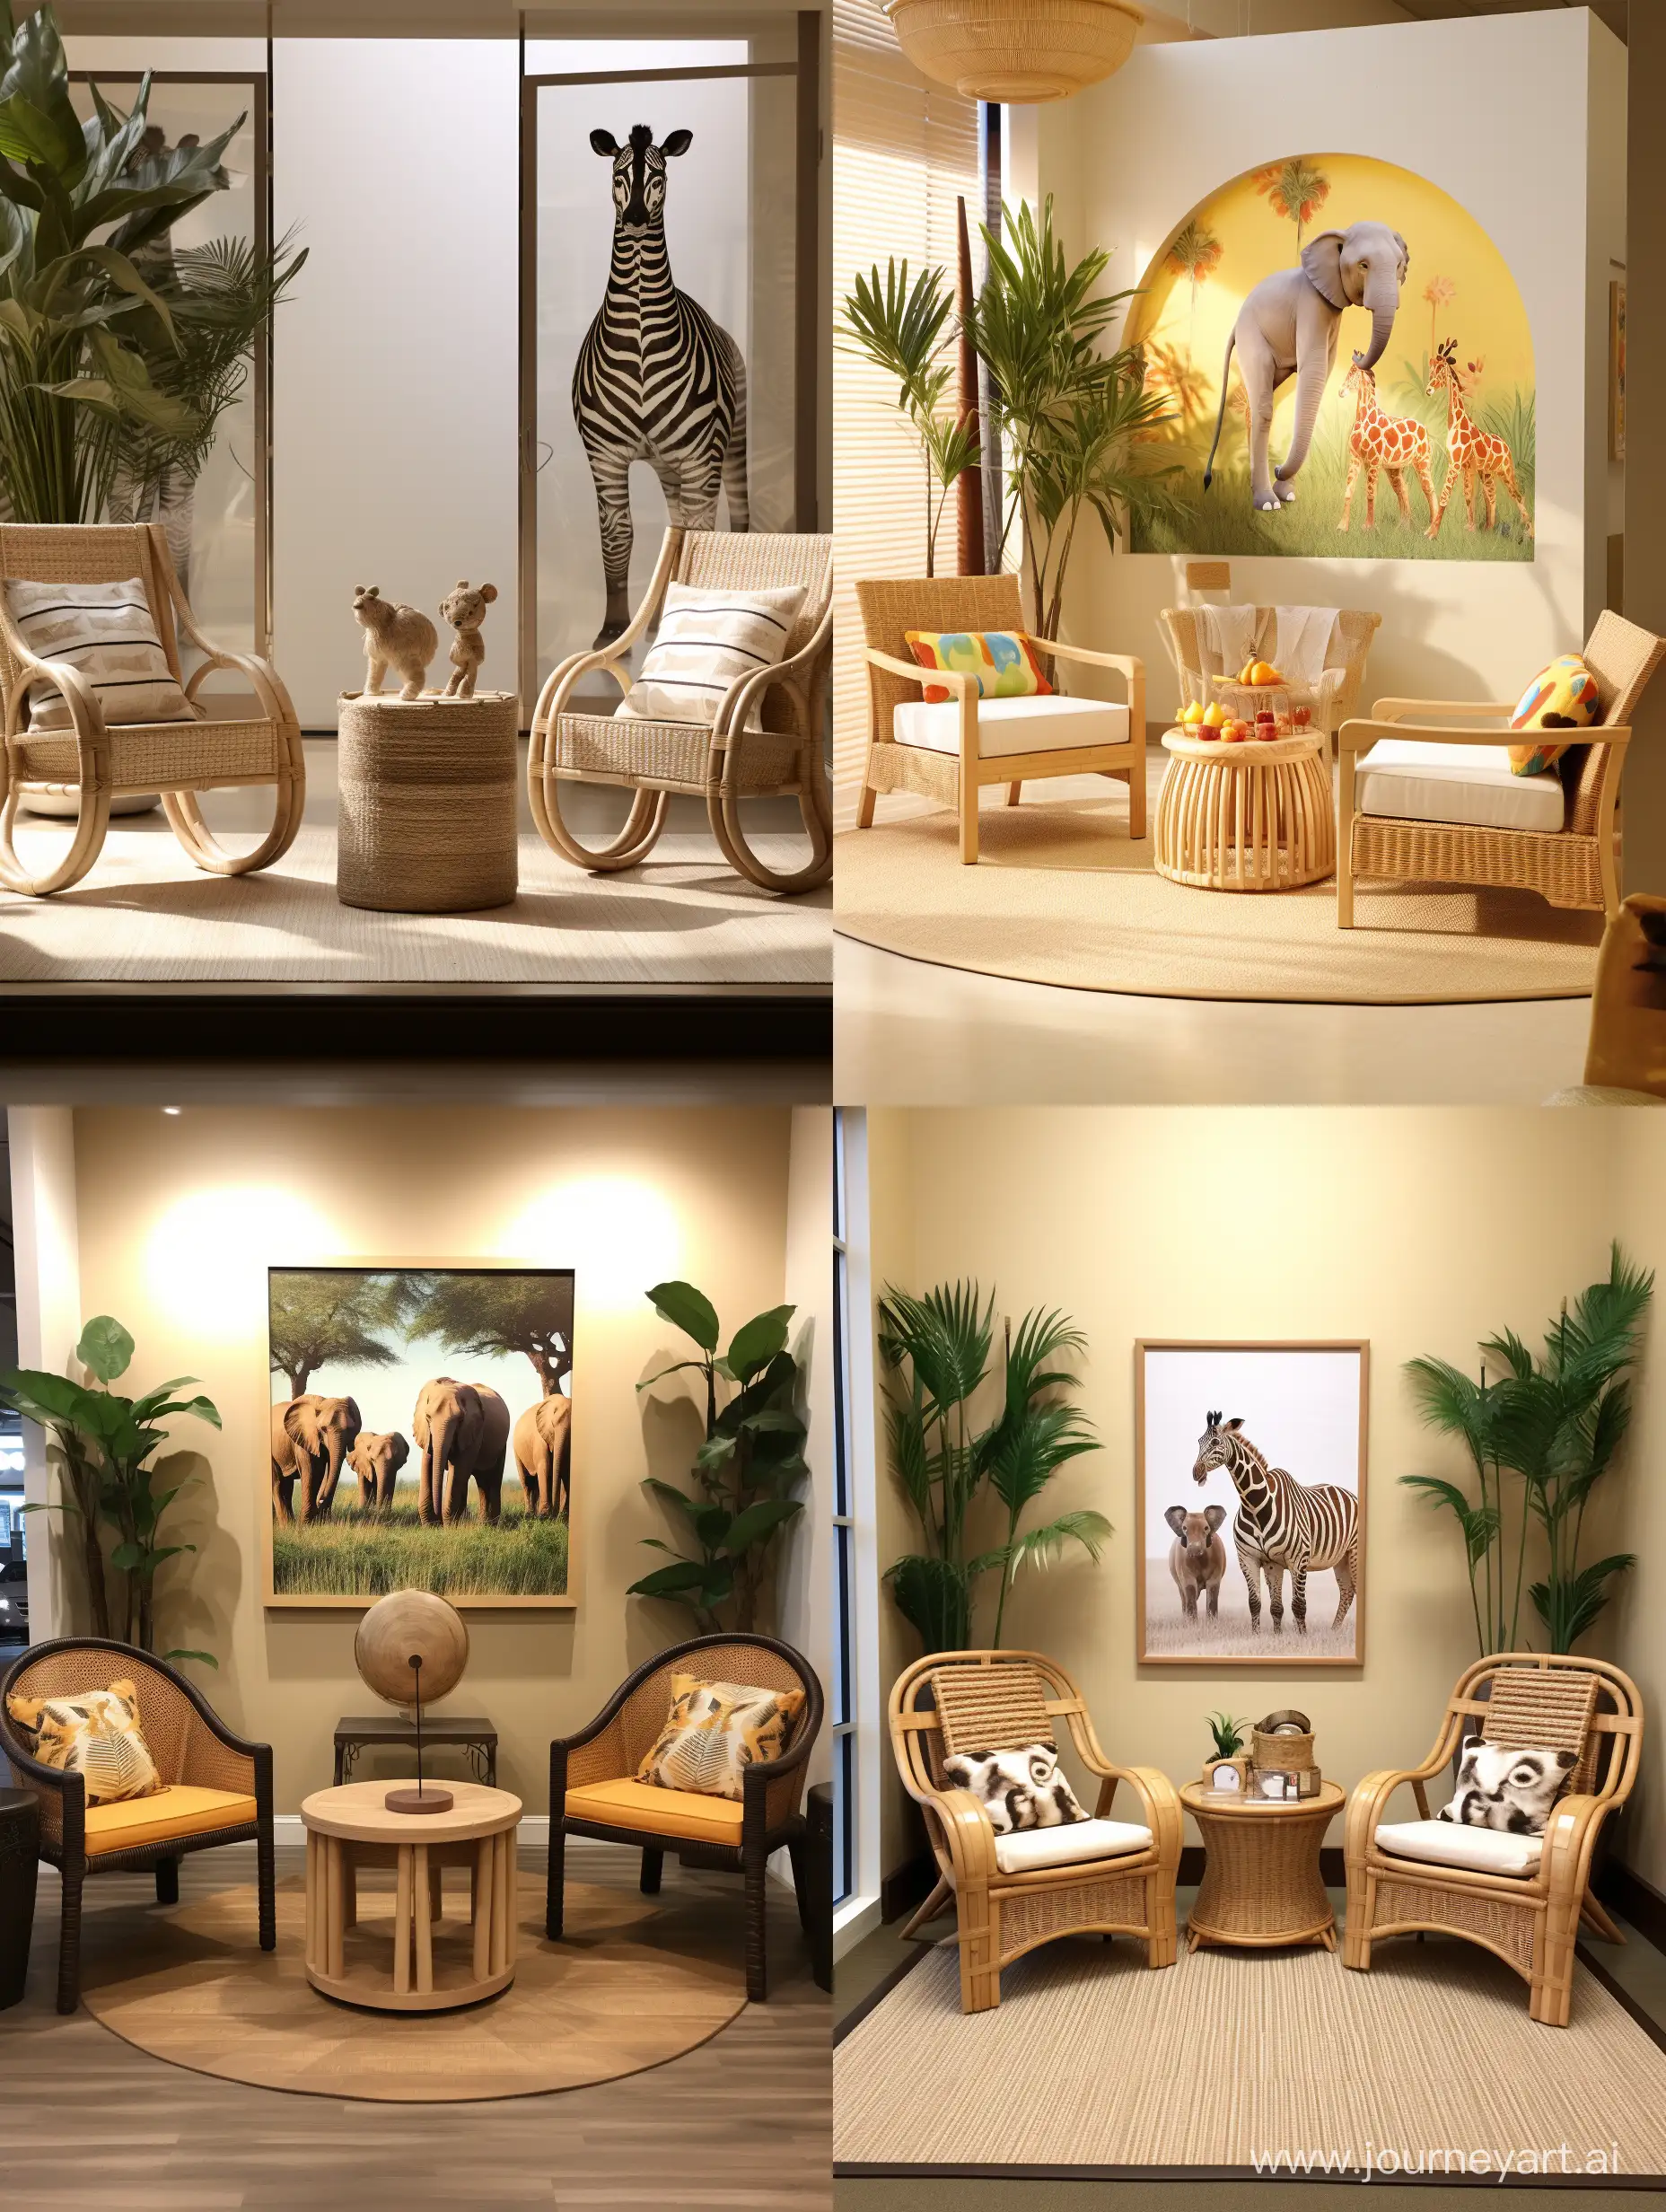 imagine an image of The small kid friendly british colonial style of interior Entrance zone of the showroom interior is designed to create a tranquil and spacious setting for the unveiling of the Safari Seat collection. The collection features cute chairs made with engineered wood tub frames and seats woven from plant fibers and recycled wood, adorned with silhouettes and designs of safari animals for children. The space is adorned with reclaimed local wood or natural stone flooring etched with subtle tracks of native wildlife, while warm-toned, locally-sourced clay or lime plaster finished walls display stylized, educational murals of endemic wildlife. A high, vaulted ceiling with exposed wooden beams adds an open canopy-like feel, complemented by custom lighting fixtures inspired by natural elements. The palette reflects the local landscape's colors, showcasing children's chairs arranged in an inviting semicircle. Locally crafted handicrafts and digital touchpoints offering interactive educational content about the chairs' sustainable journey and local culture are strategically placed within the space. The design prioritizes sustainable, natural elements and cultural storytelling, conveying a commitment to harmonious and innovative design principles.interior design style